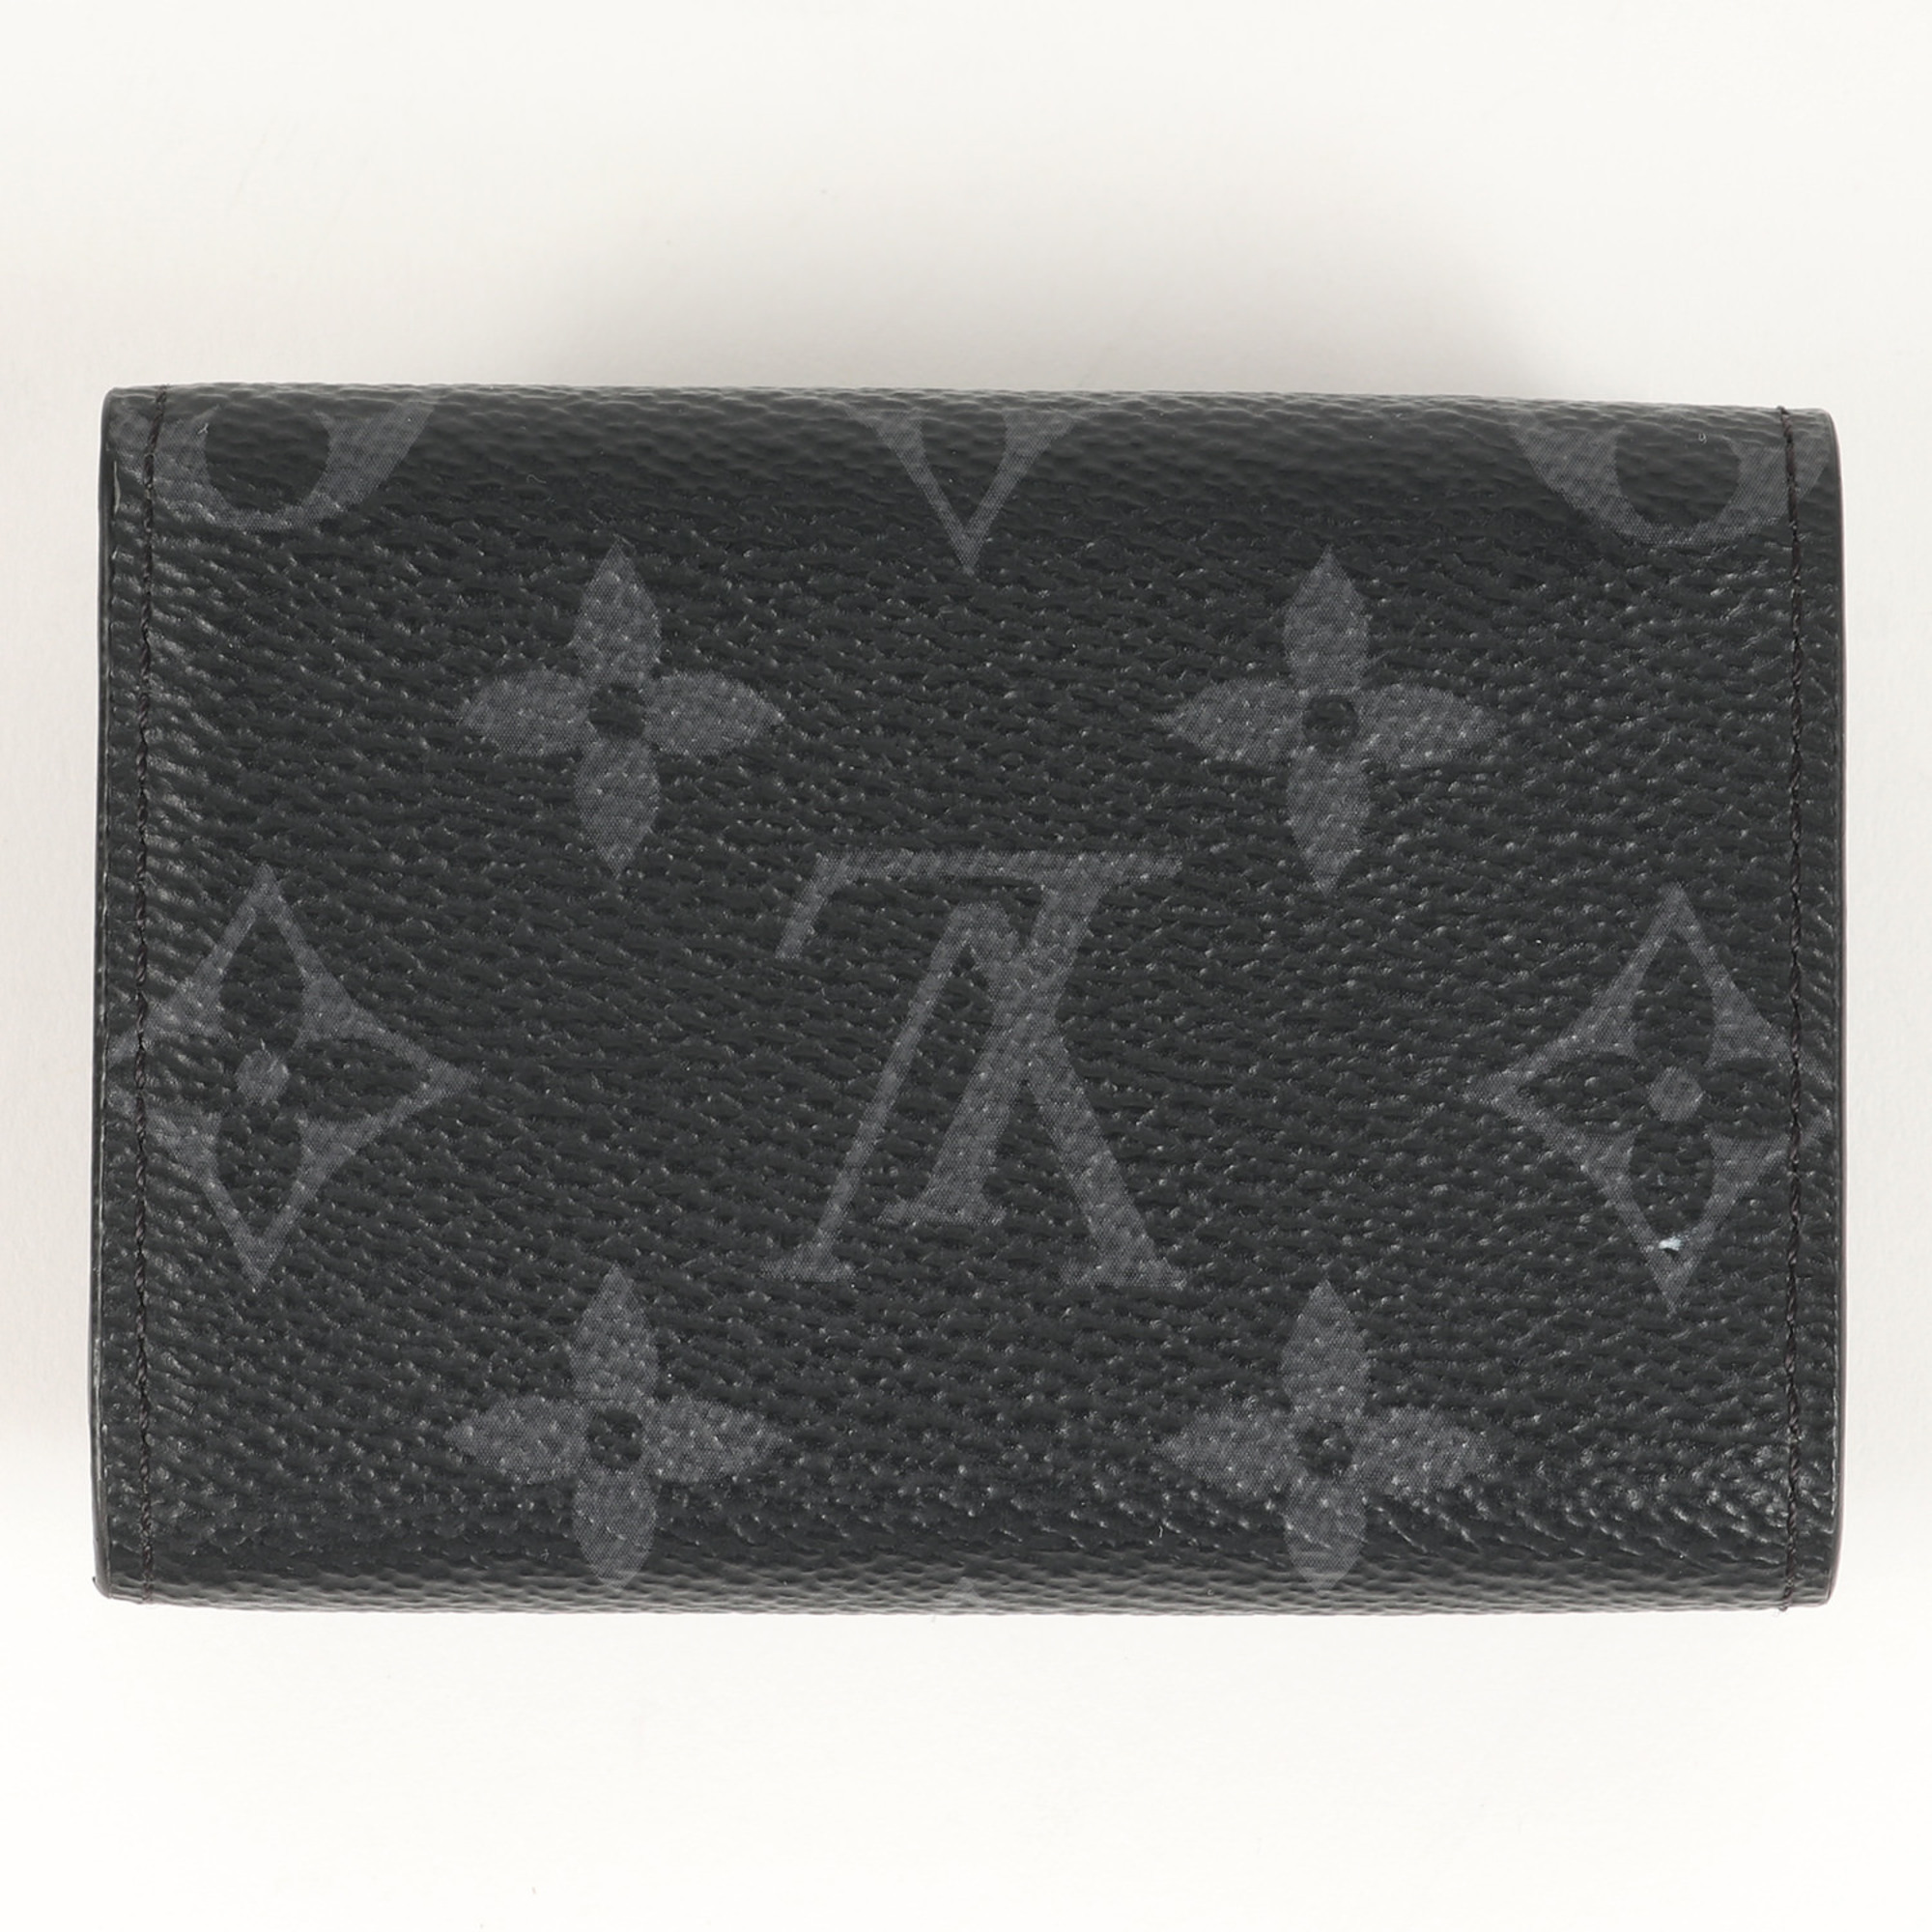 LOUIS VUITTON Monogram Eclipse Reverse Discovery Compact Wallet M45417 Trifold Current Model Black Gray Made in Spain